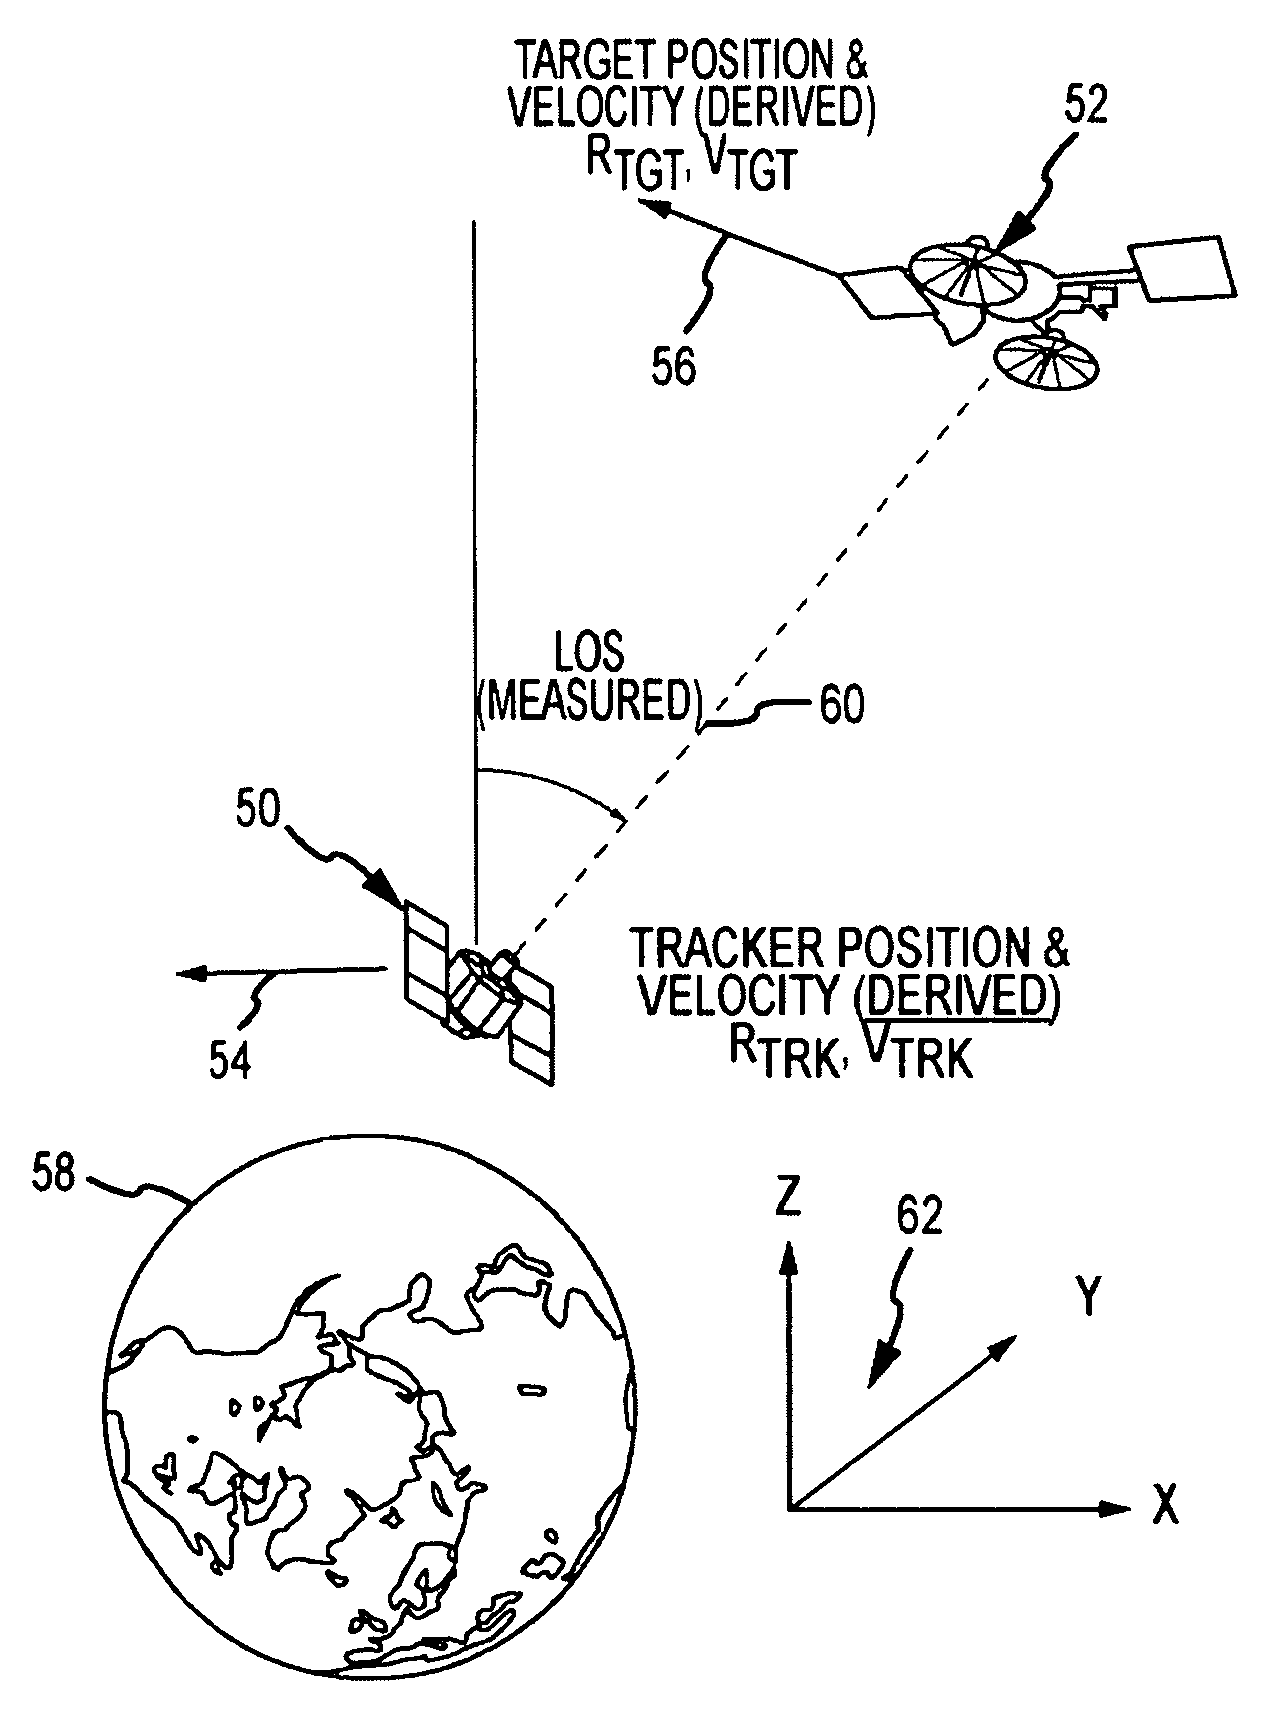 System and method of passive and autonomous navigation of space vehicles using an extended Kalman filter